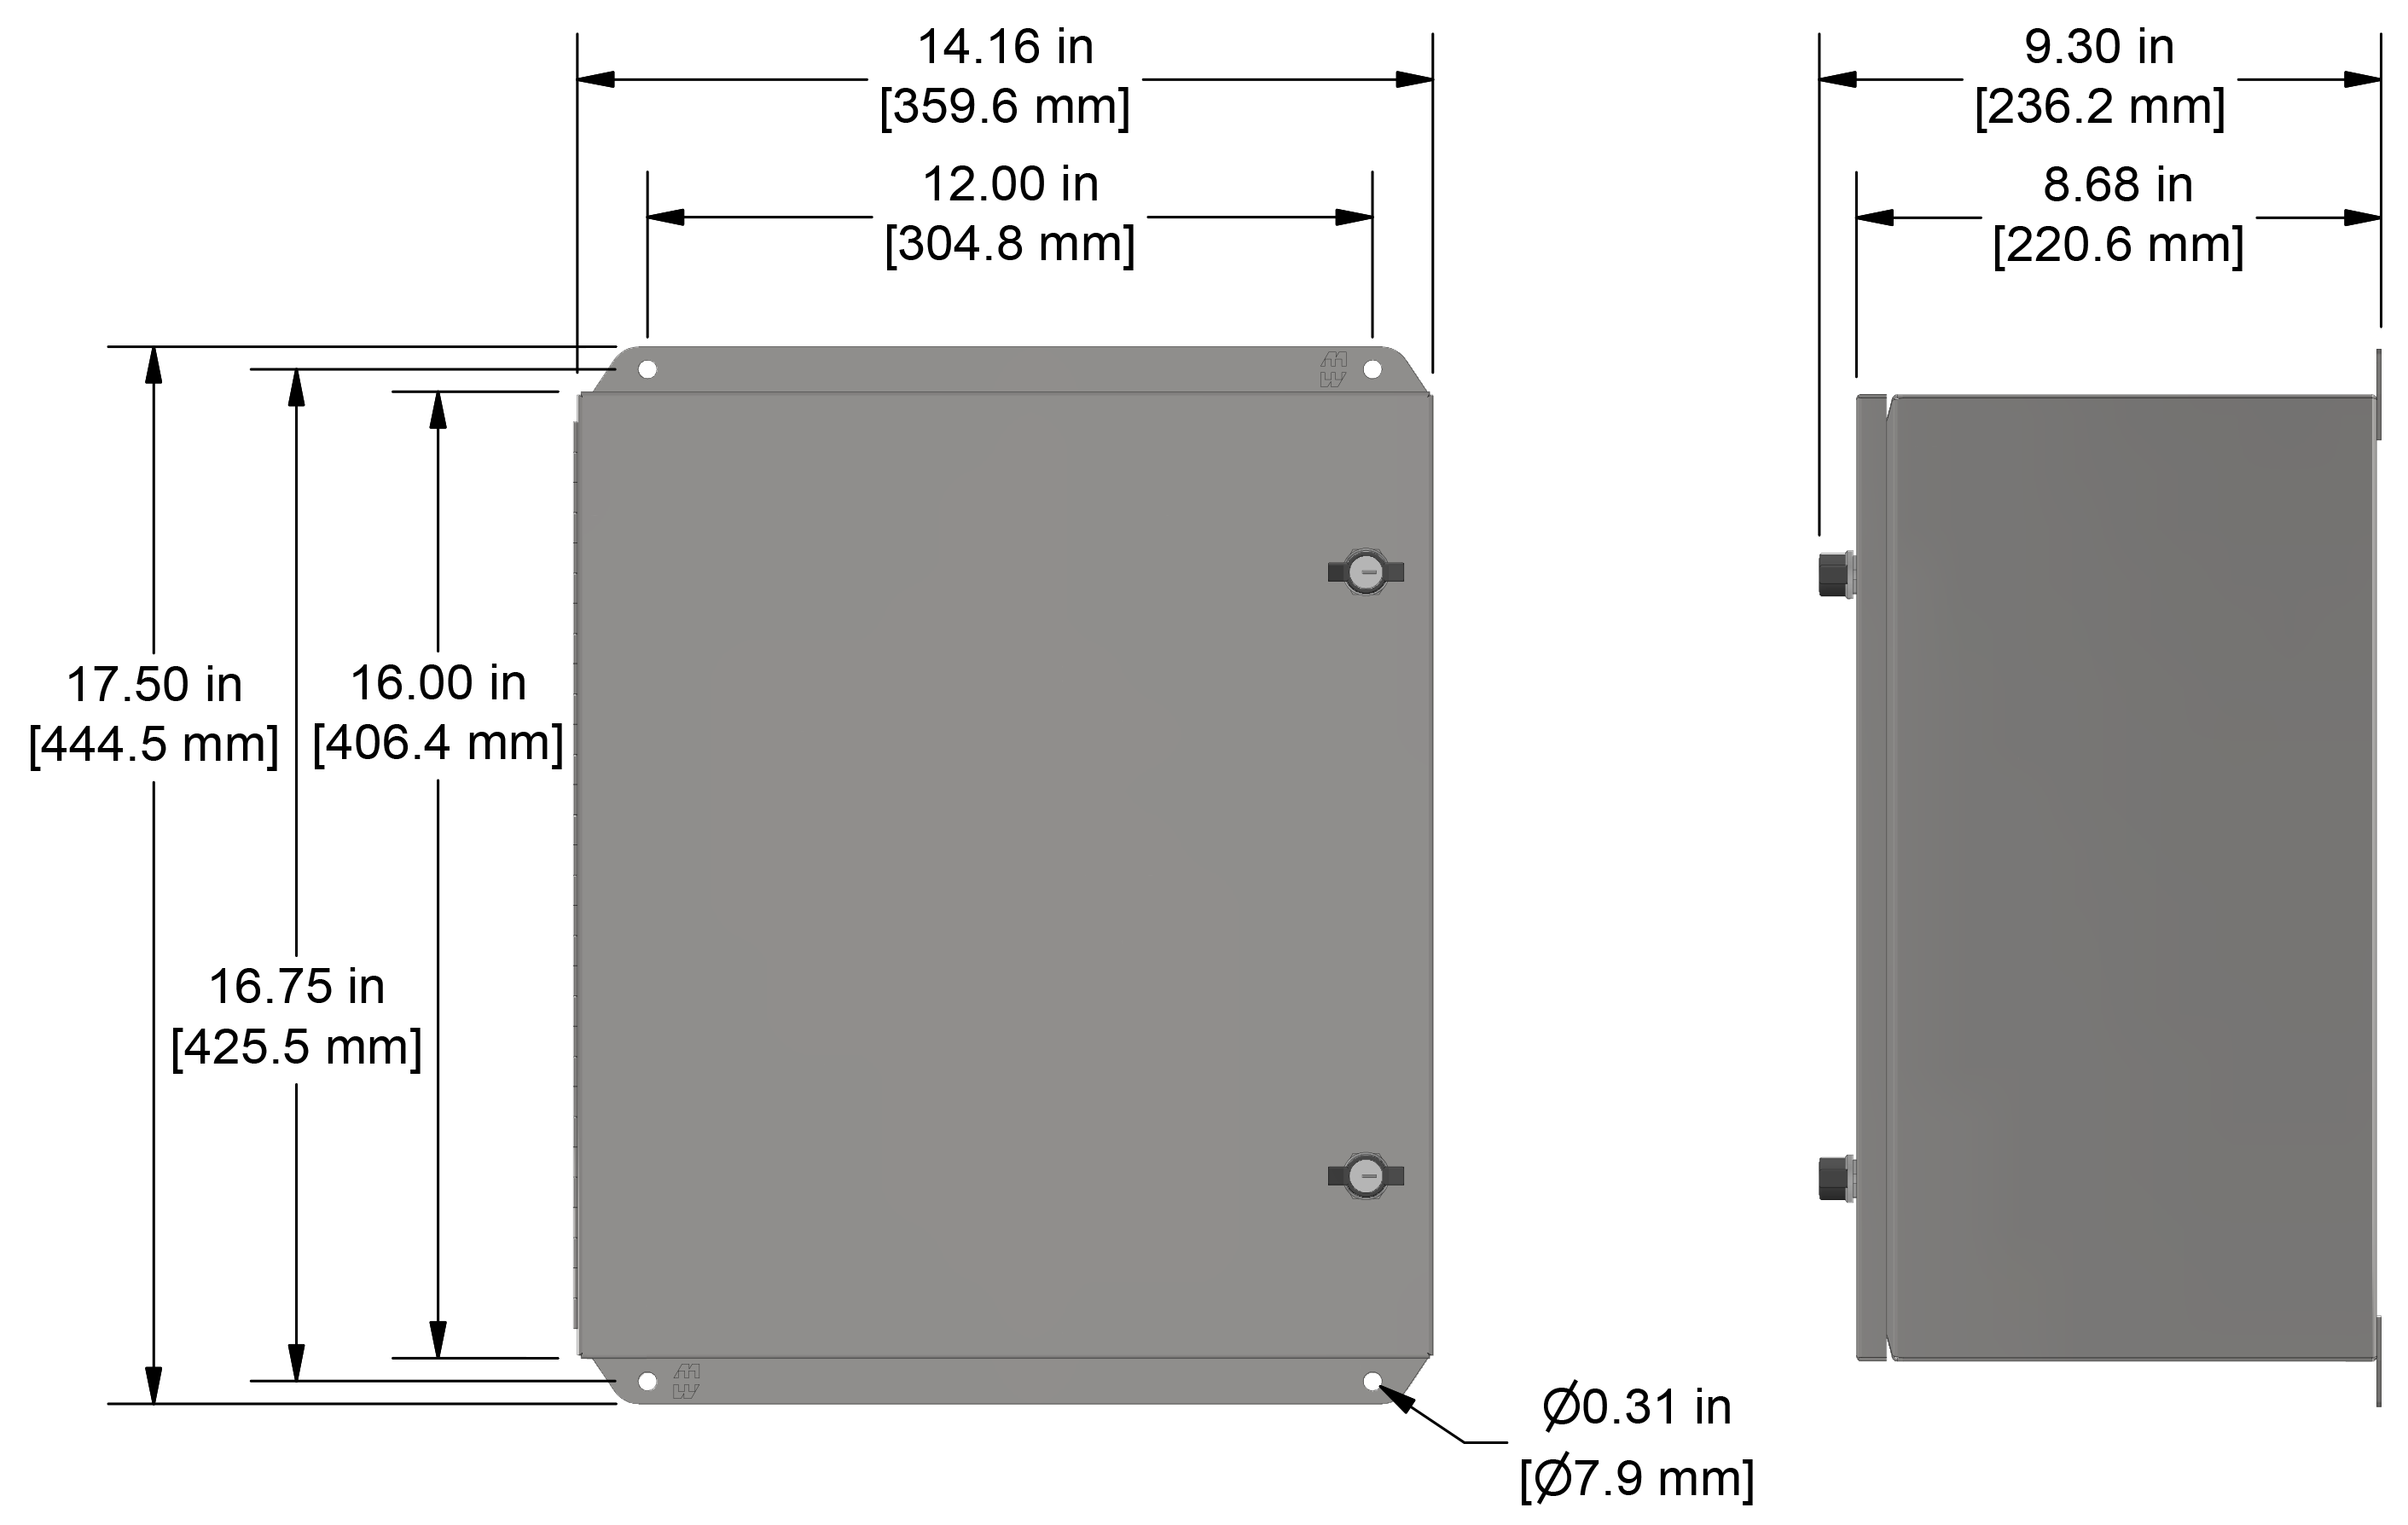 A drawing showing the dimensions of a CTC DSB4000 industrial enclosure.